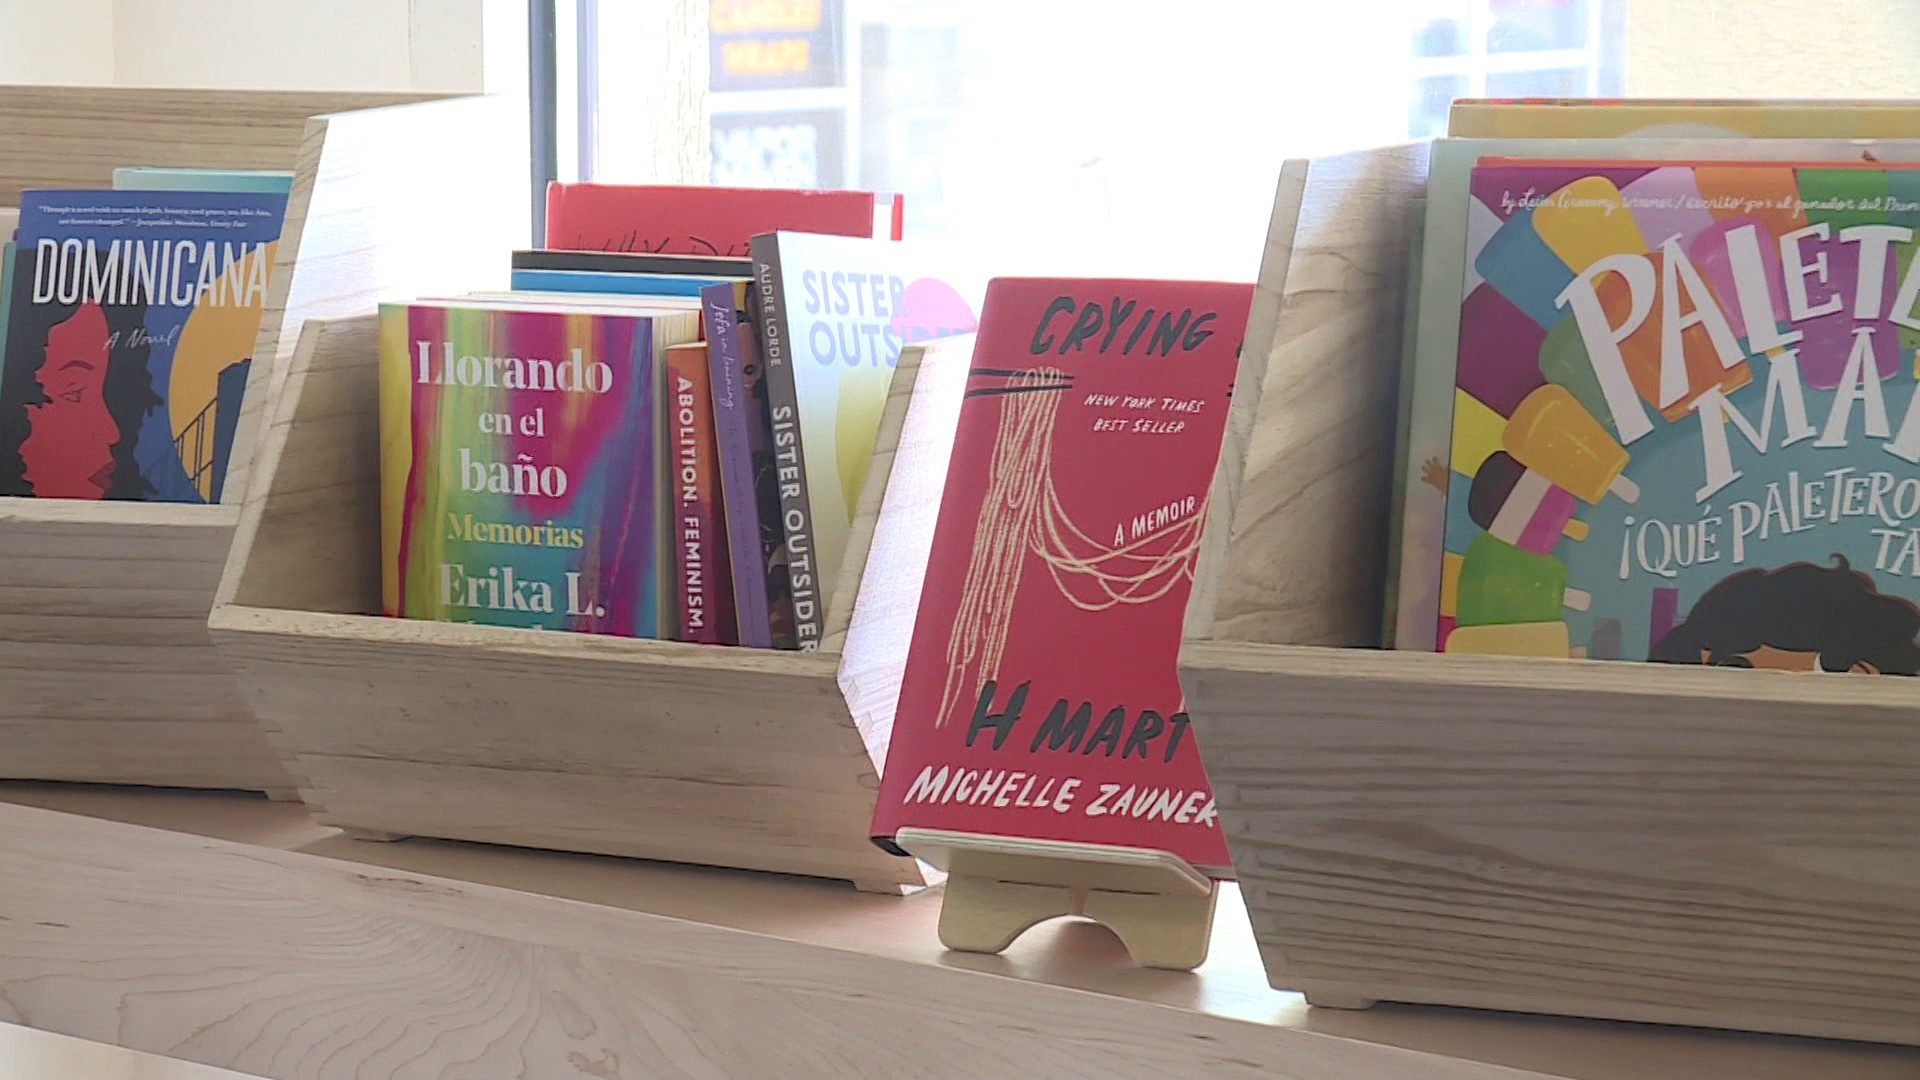 As Women's history month comes to a close, two NWA Latina-owned businesses partnered together to amplify minority voices through books and community.